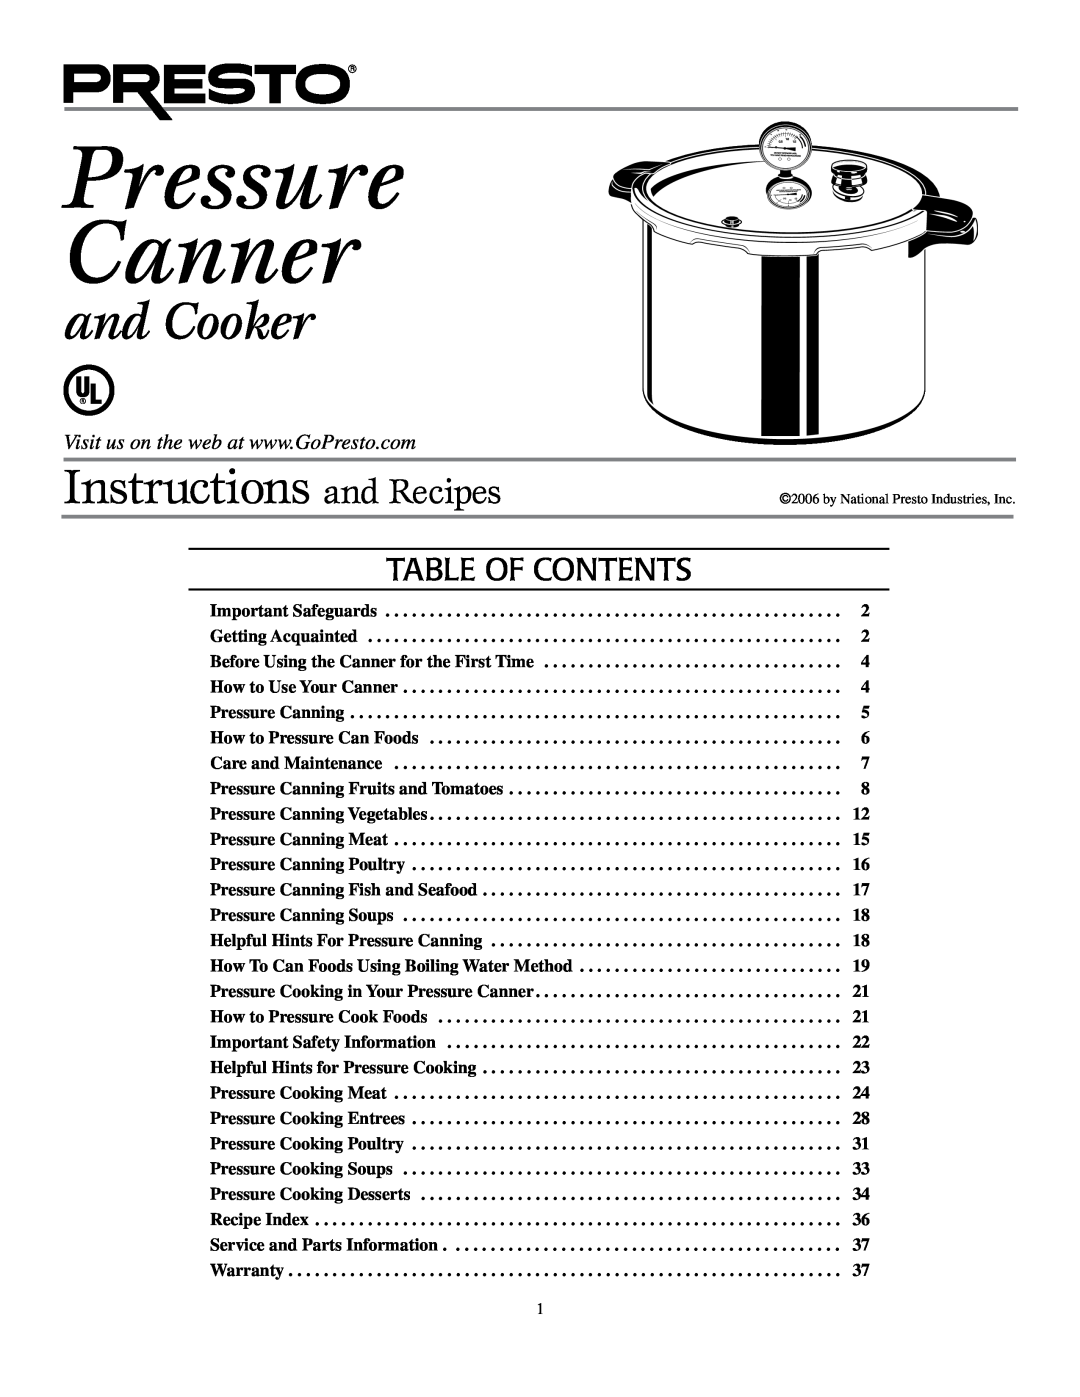 Presto Electric Pressure Washer warranty Table of Contents, Pressure Canner, and Cooker, Instructions and Recipes 